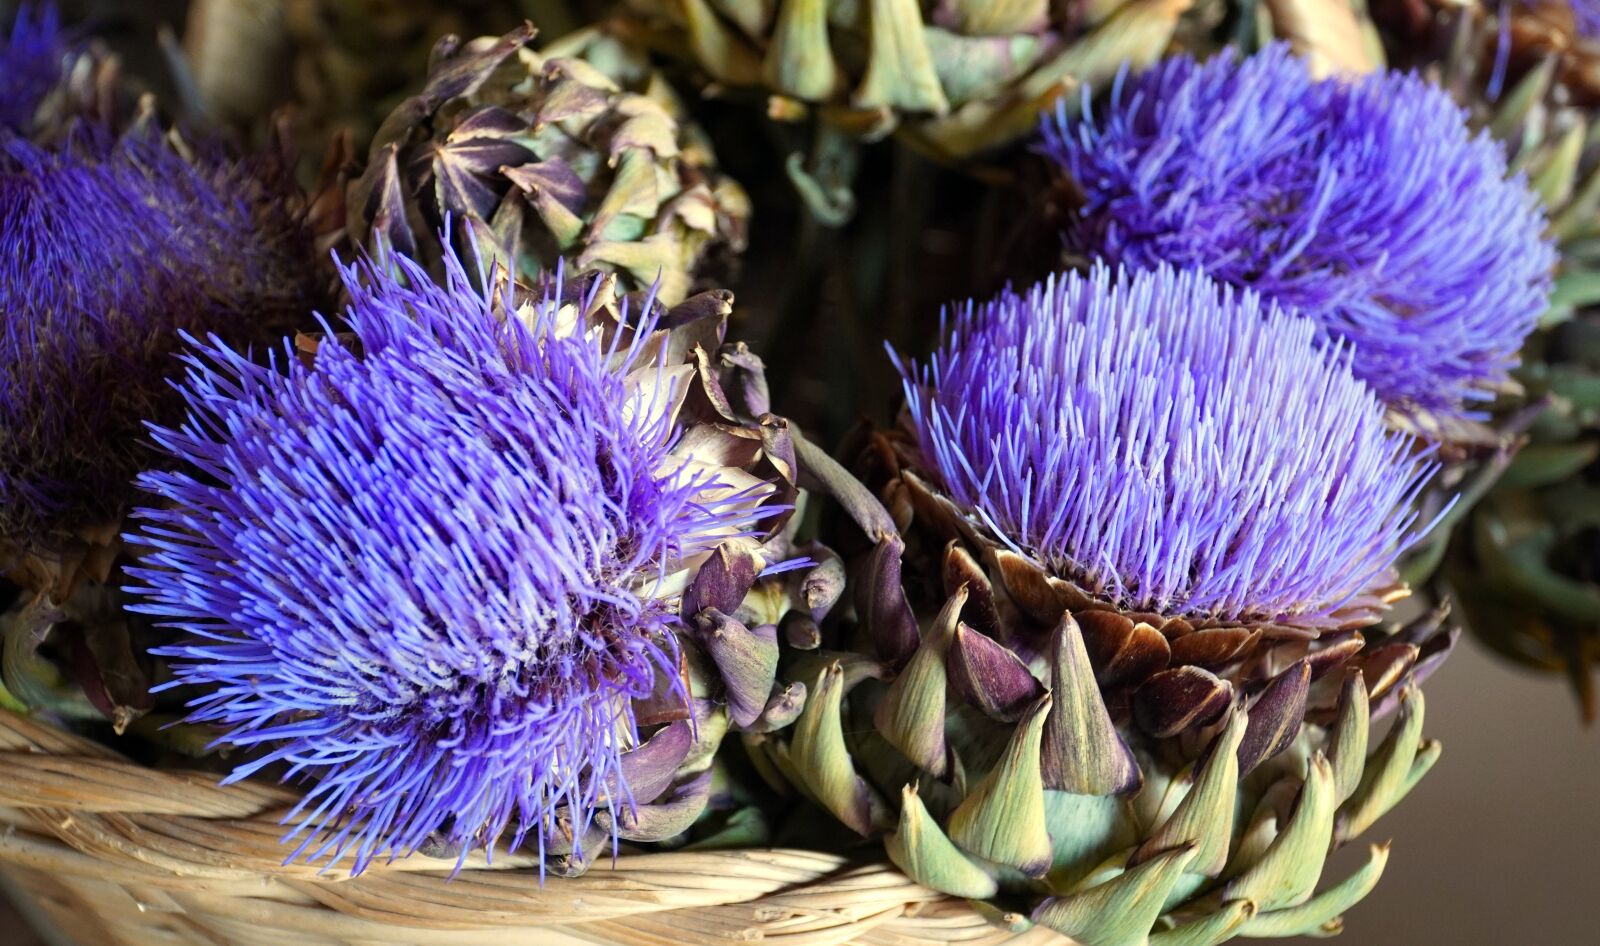 Sony a6400 sample photo. Artichokes, flowers, vegetables photography